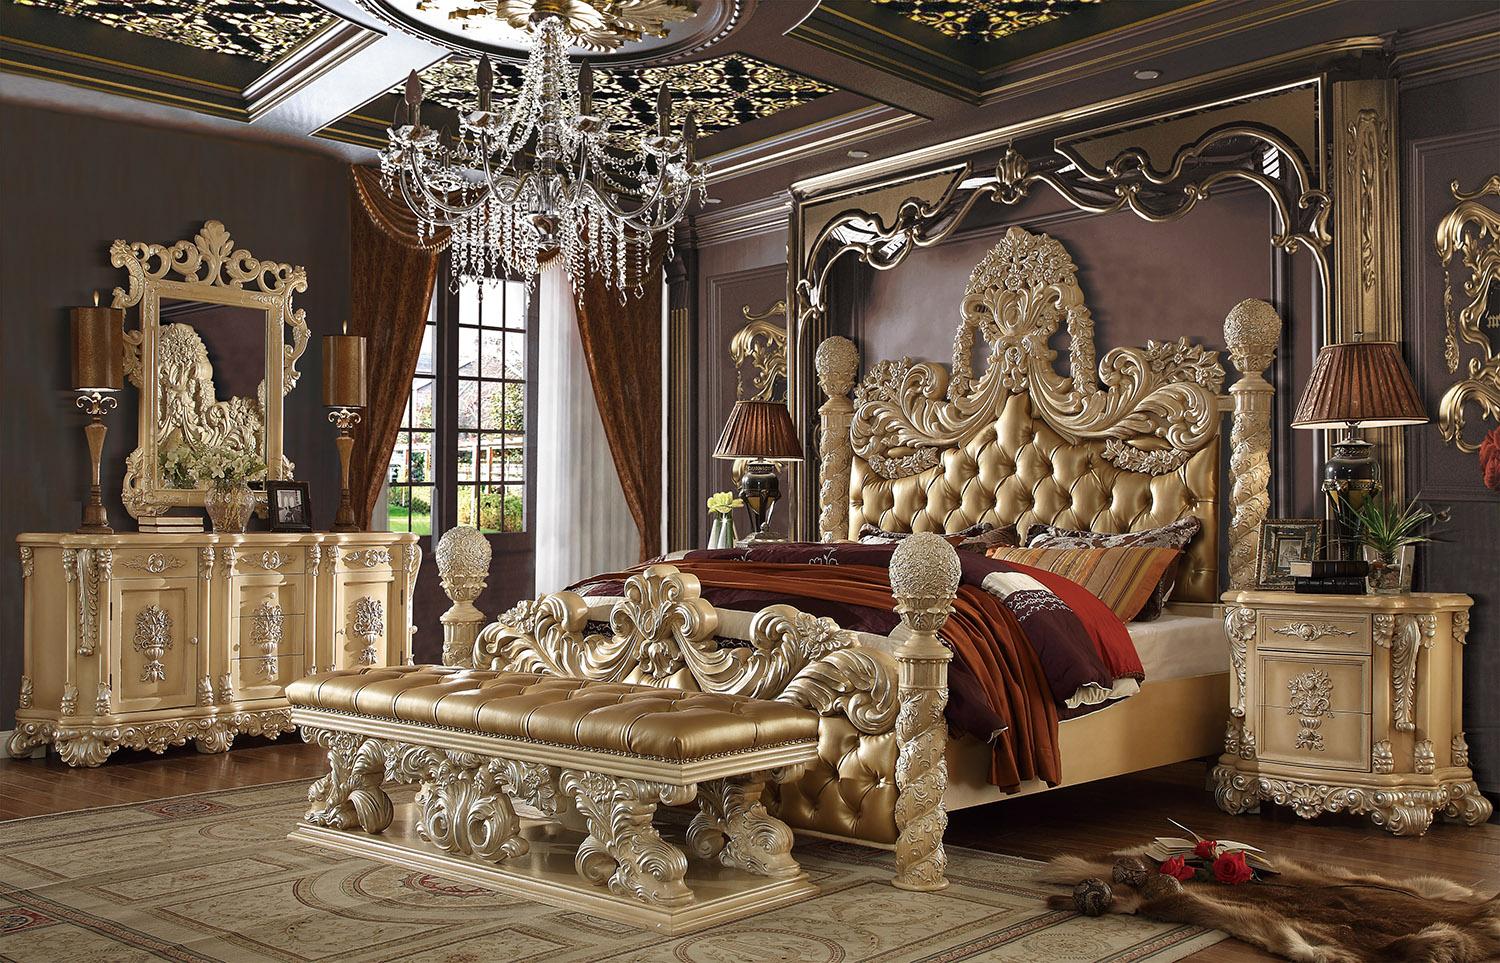 Traditional Poster Bedroom Set HD-7266 – CK 5PC BEDROOM SET HD-7266-BSET5-CK in Khaki, Gold Leather